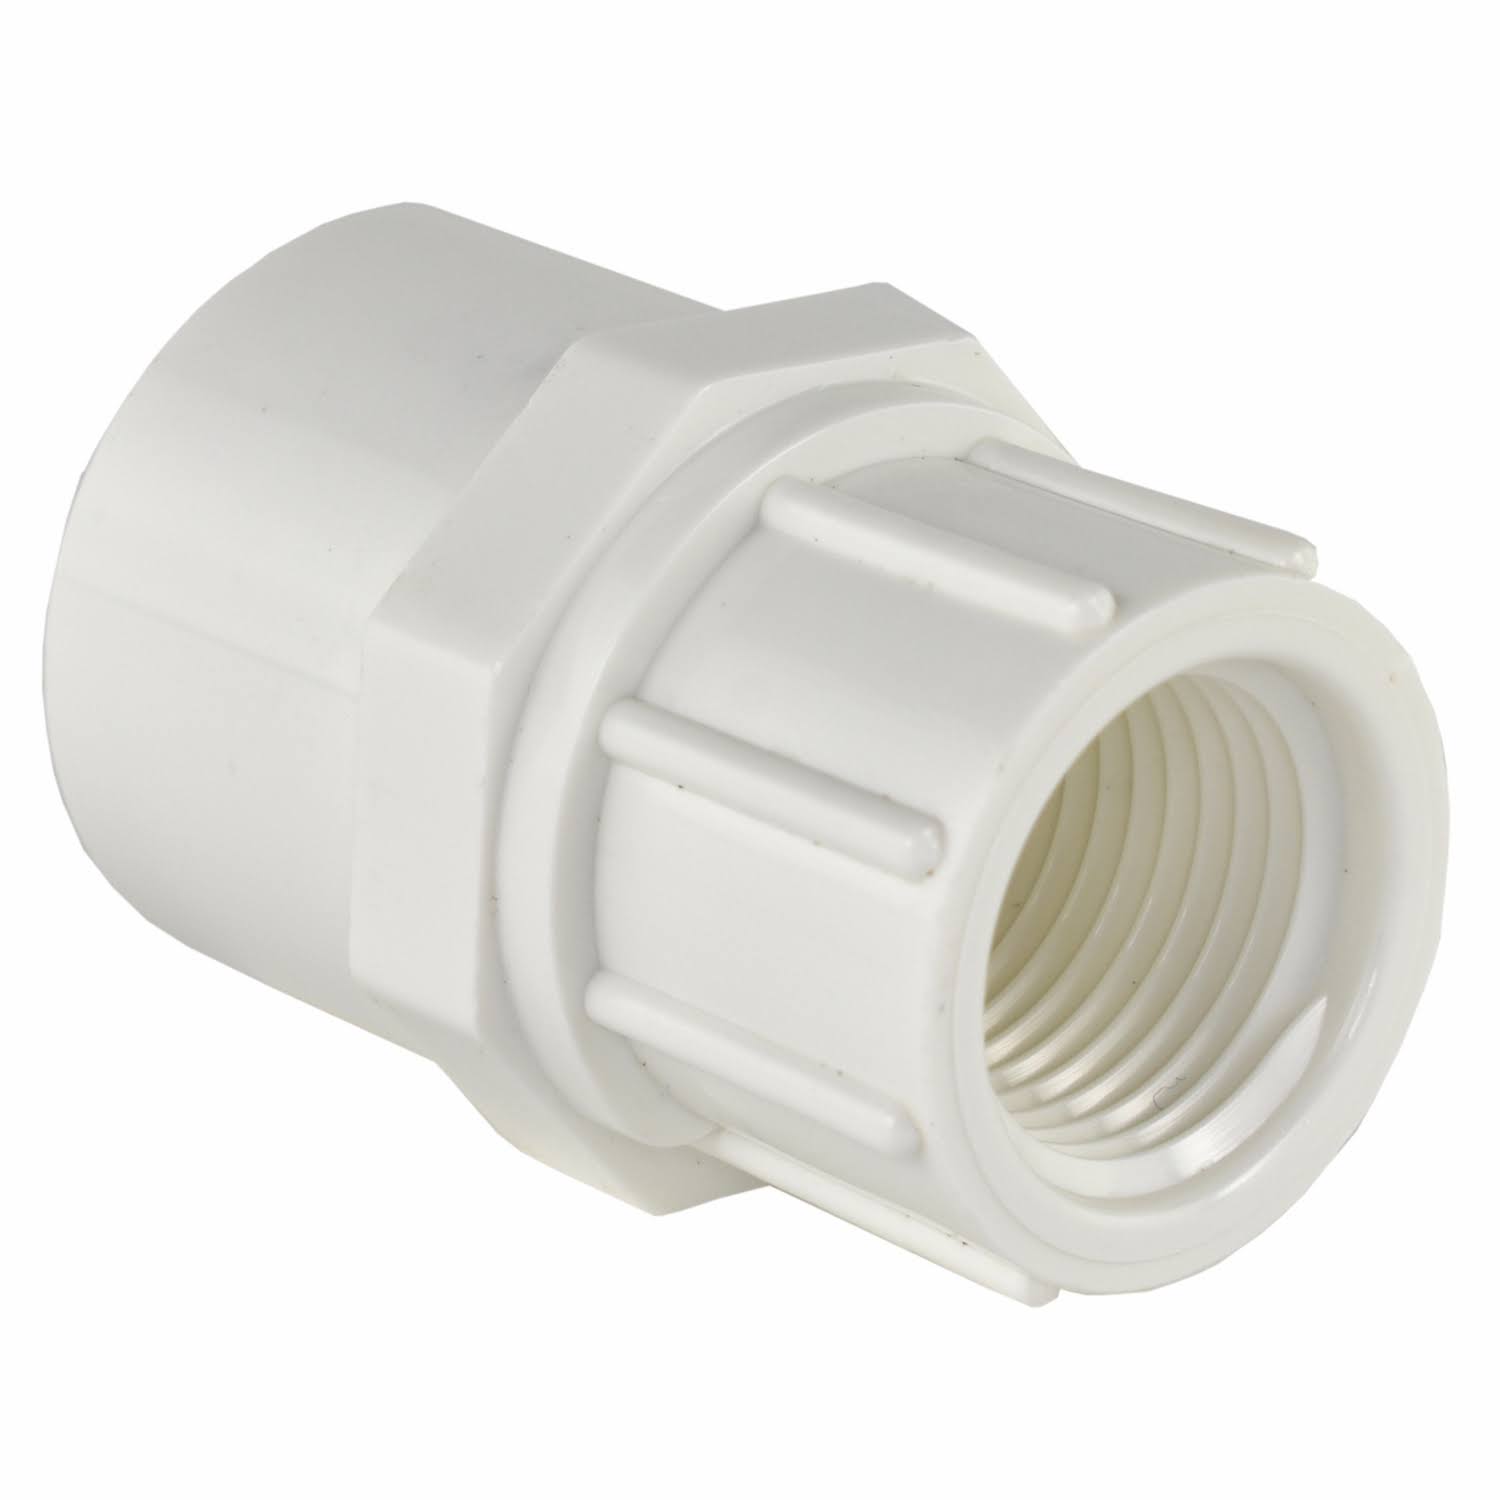 Charlotte Pipe PVC Reducing Adapter - 3/4" x 1/2"